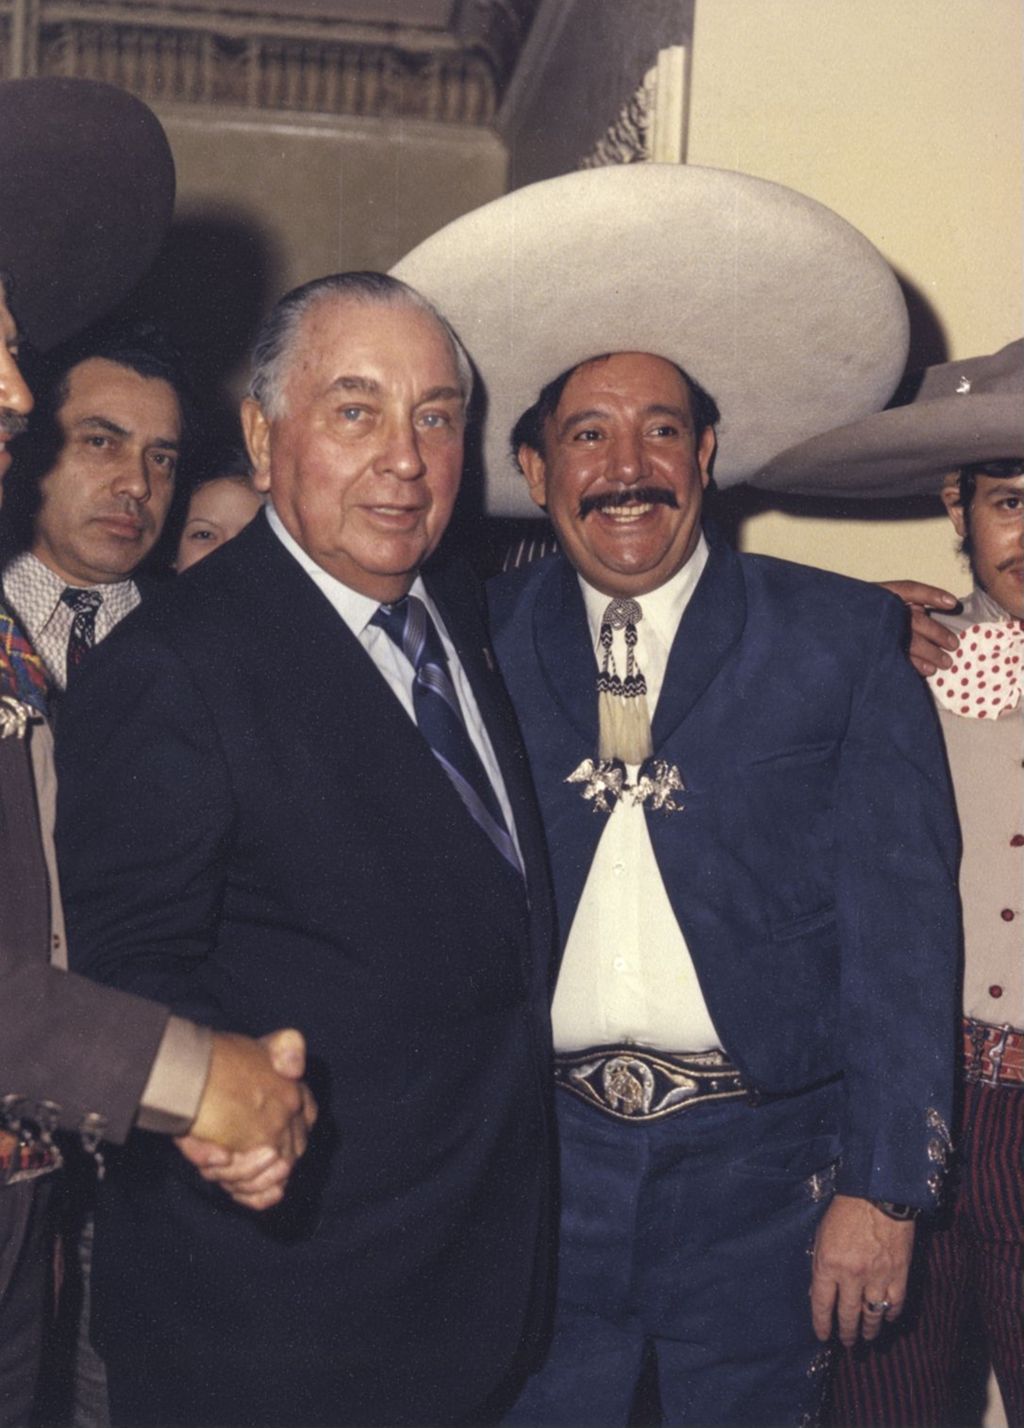 Miniature of Richard J. Daley at Mexican American Democratic Organization of Cook County event